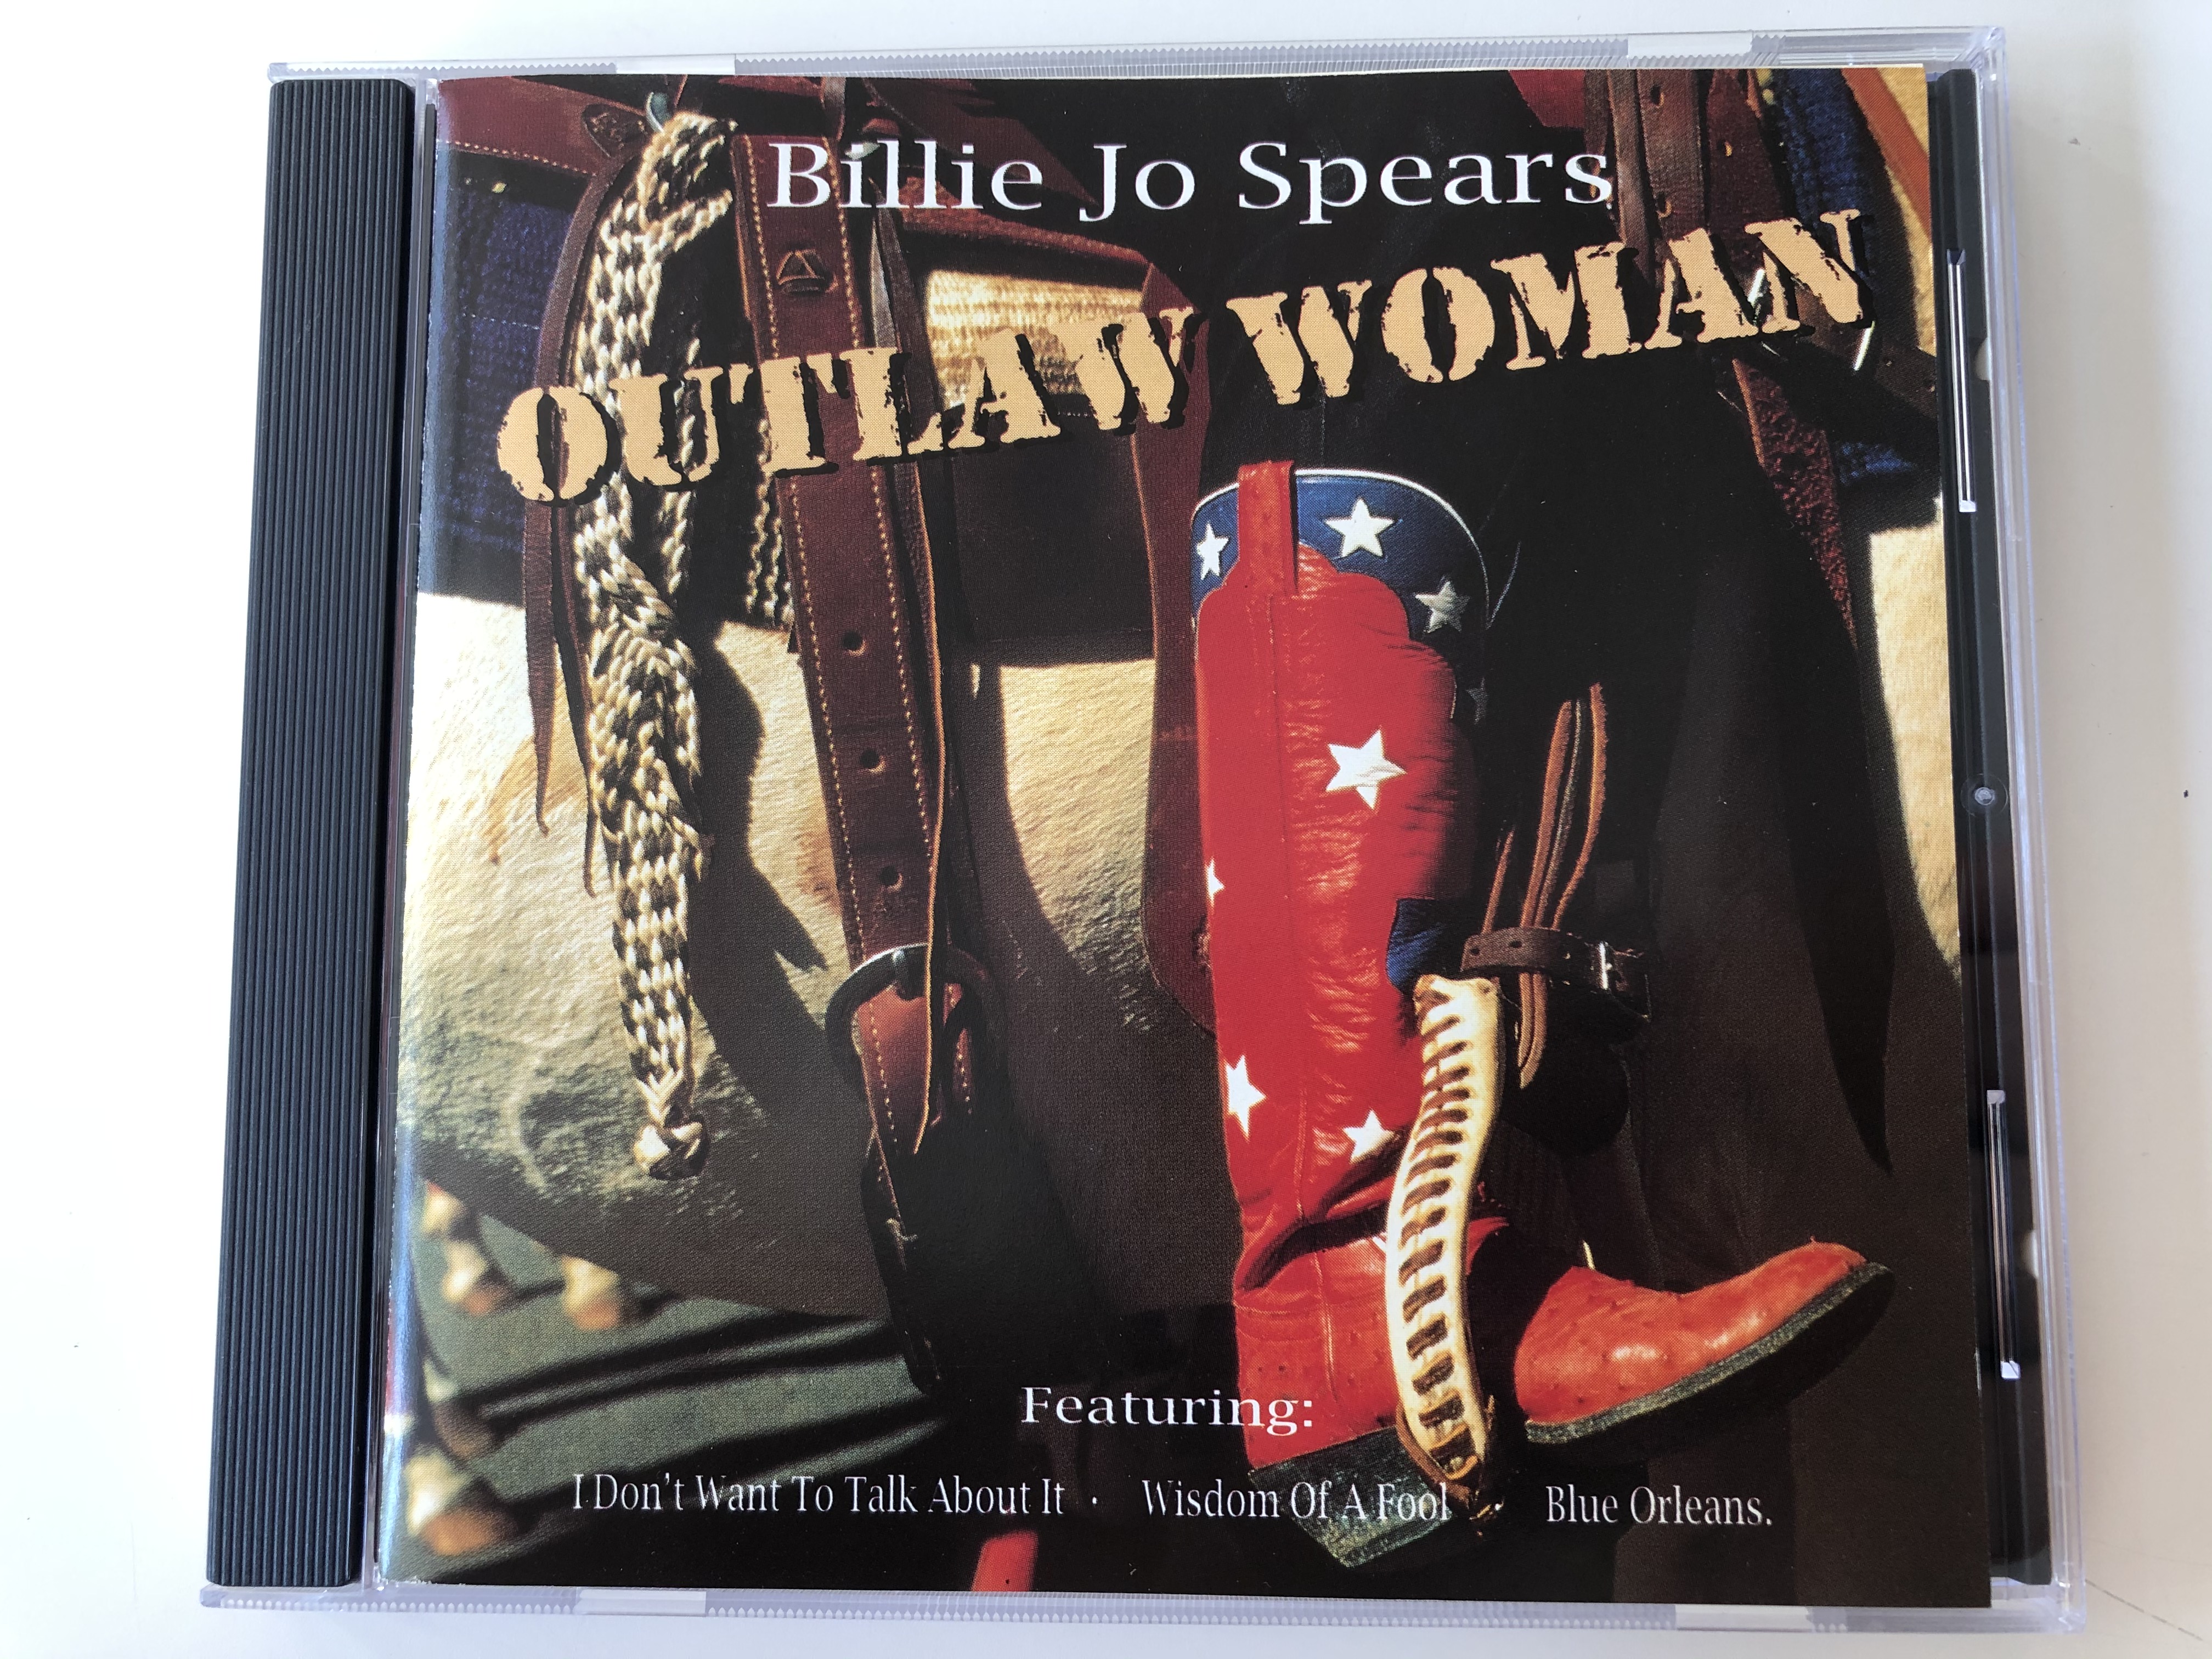 billie-jo-spears-outlaw-woman-featuring-i-don-t-to-talk-about-it-wisdom-of-a-fool-blue-orleans-country-skyline-audio-cd-1996-30363-00092-1-.jpg